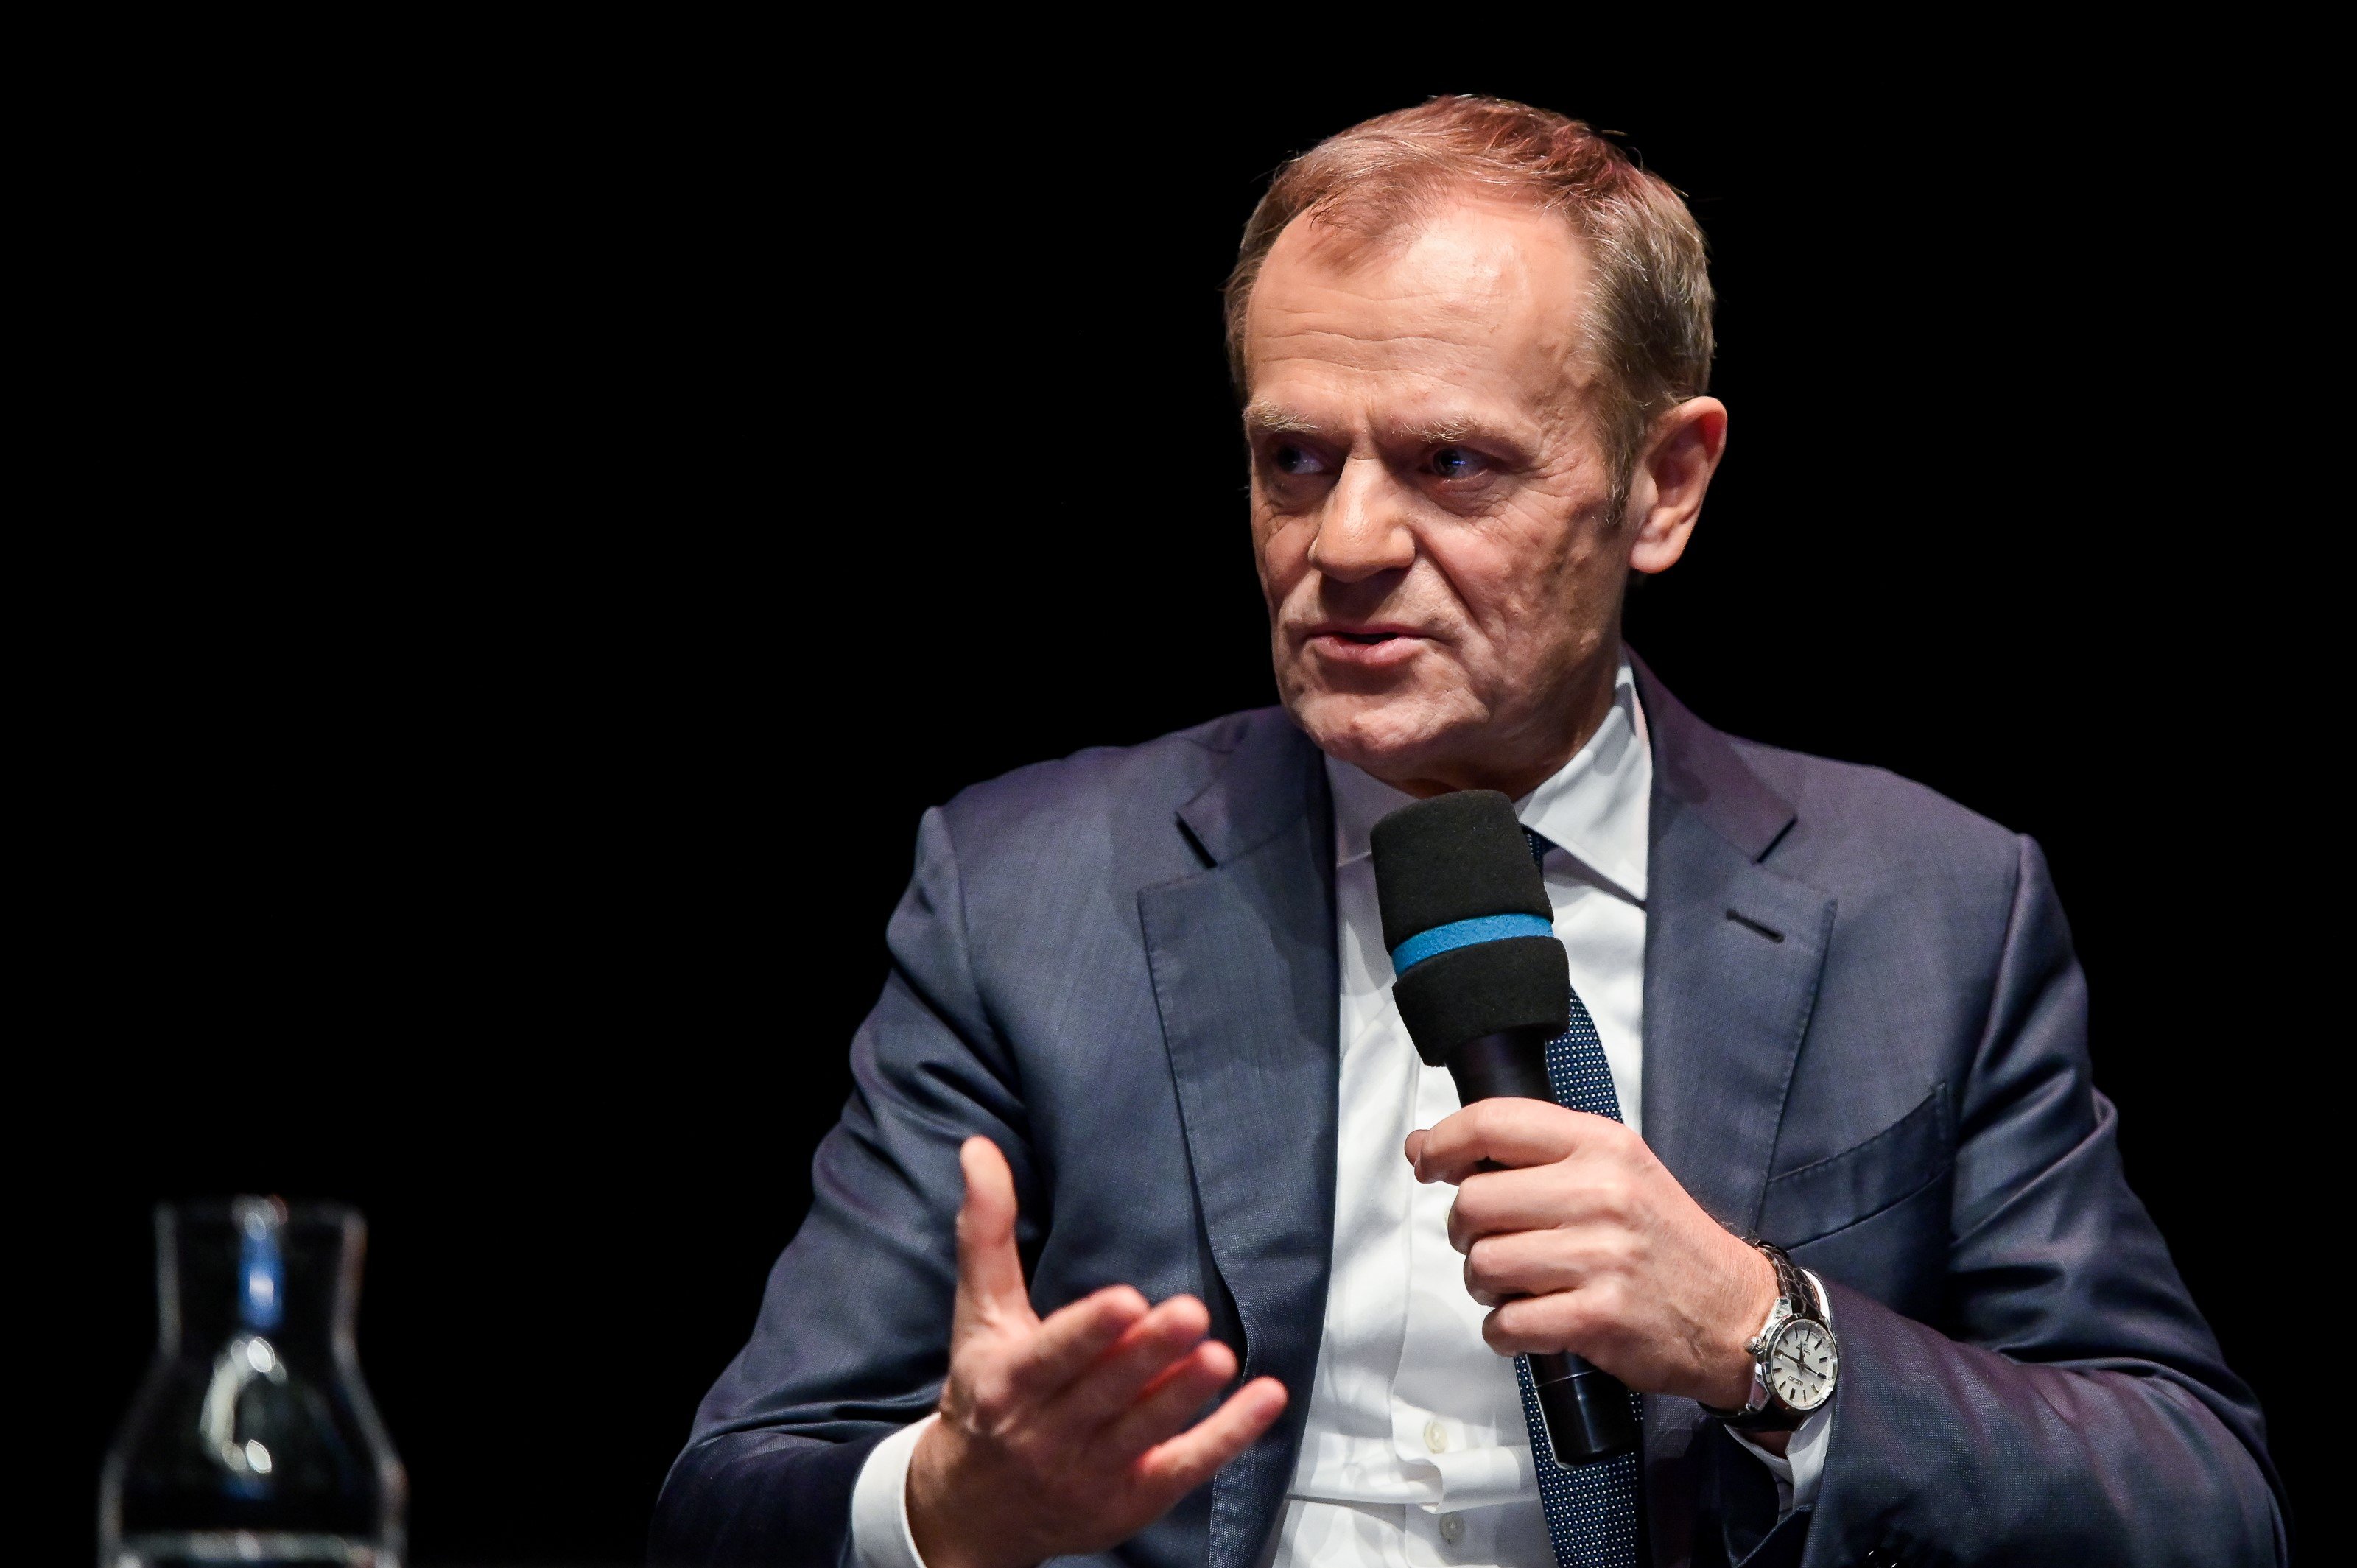 EuropaPress 2556917 18 December 2019 Poland Danzig Donald Tusk Former President of the European Council and President of the European People's Party speaks during a promotional event for his new book at the